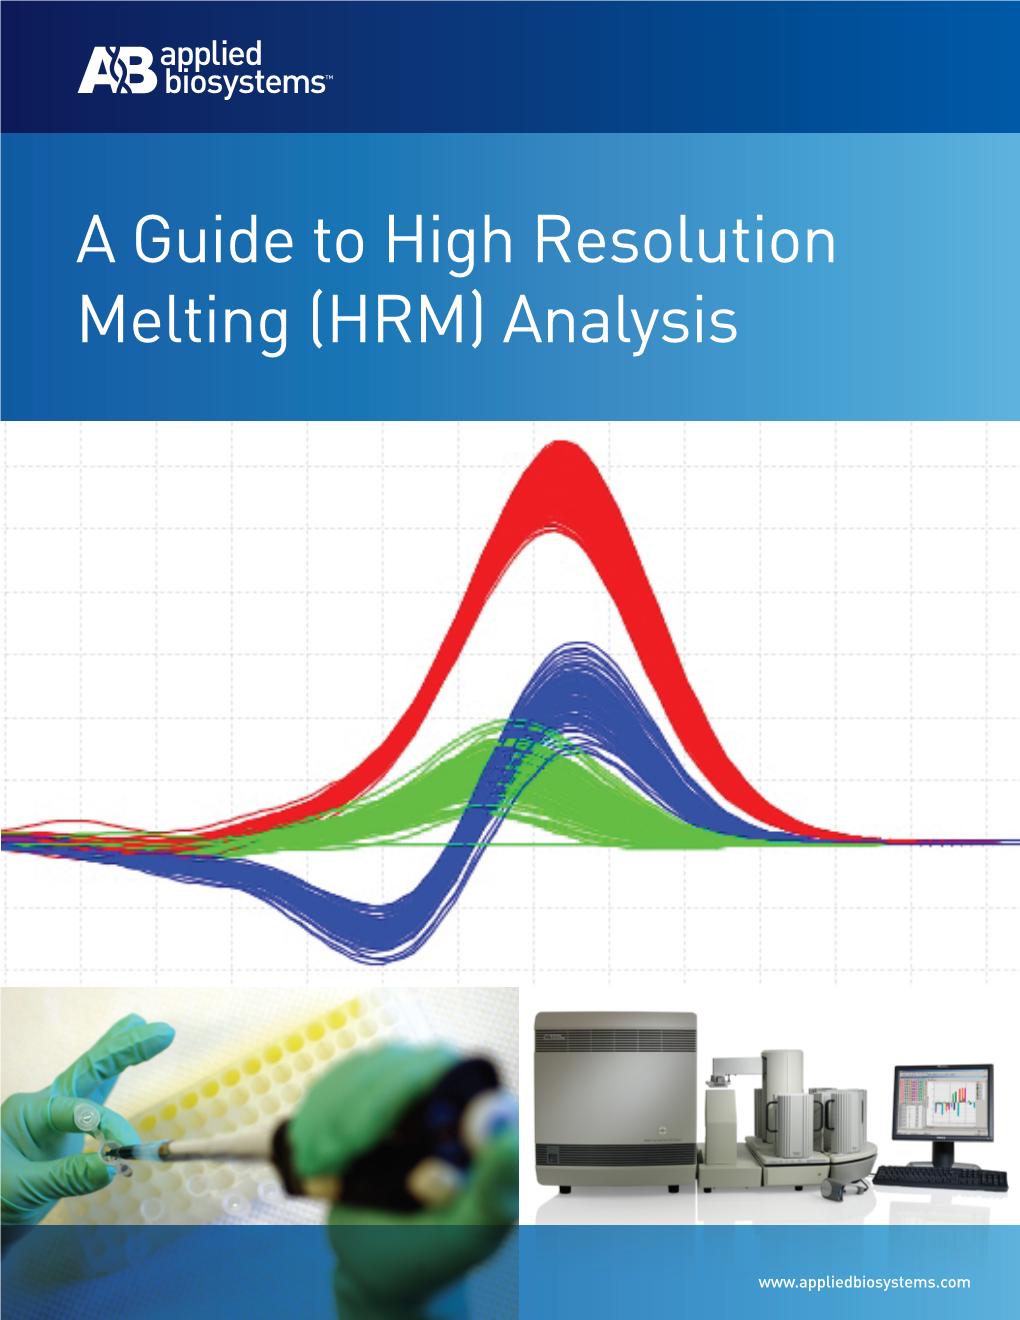 A Guide to High Resolution Melting (HRM) Analysis